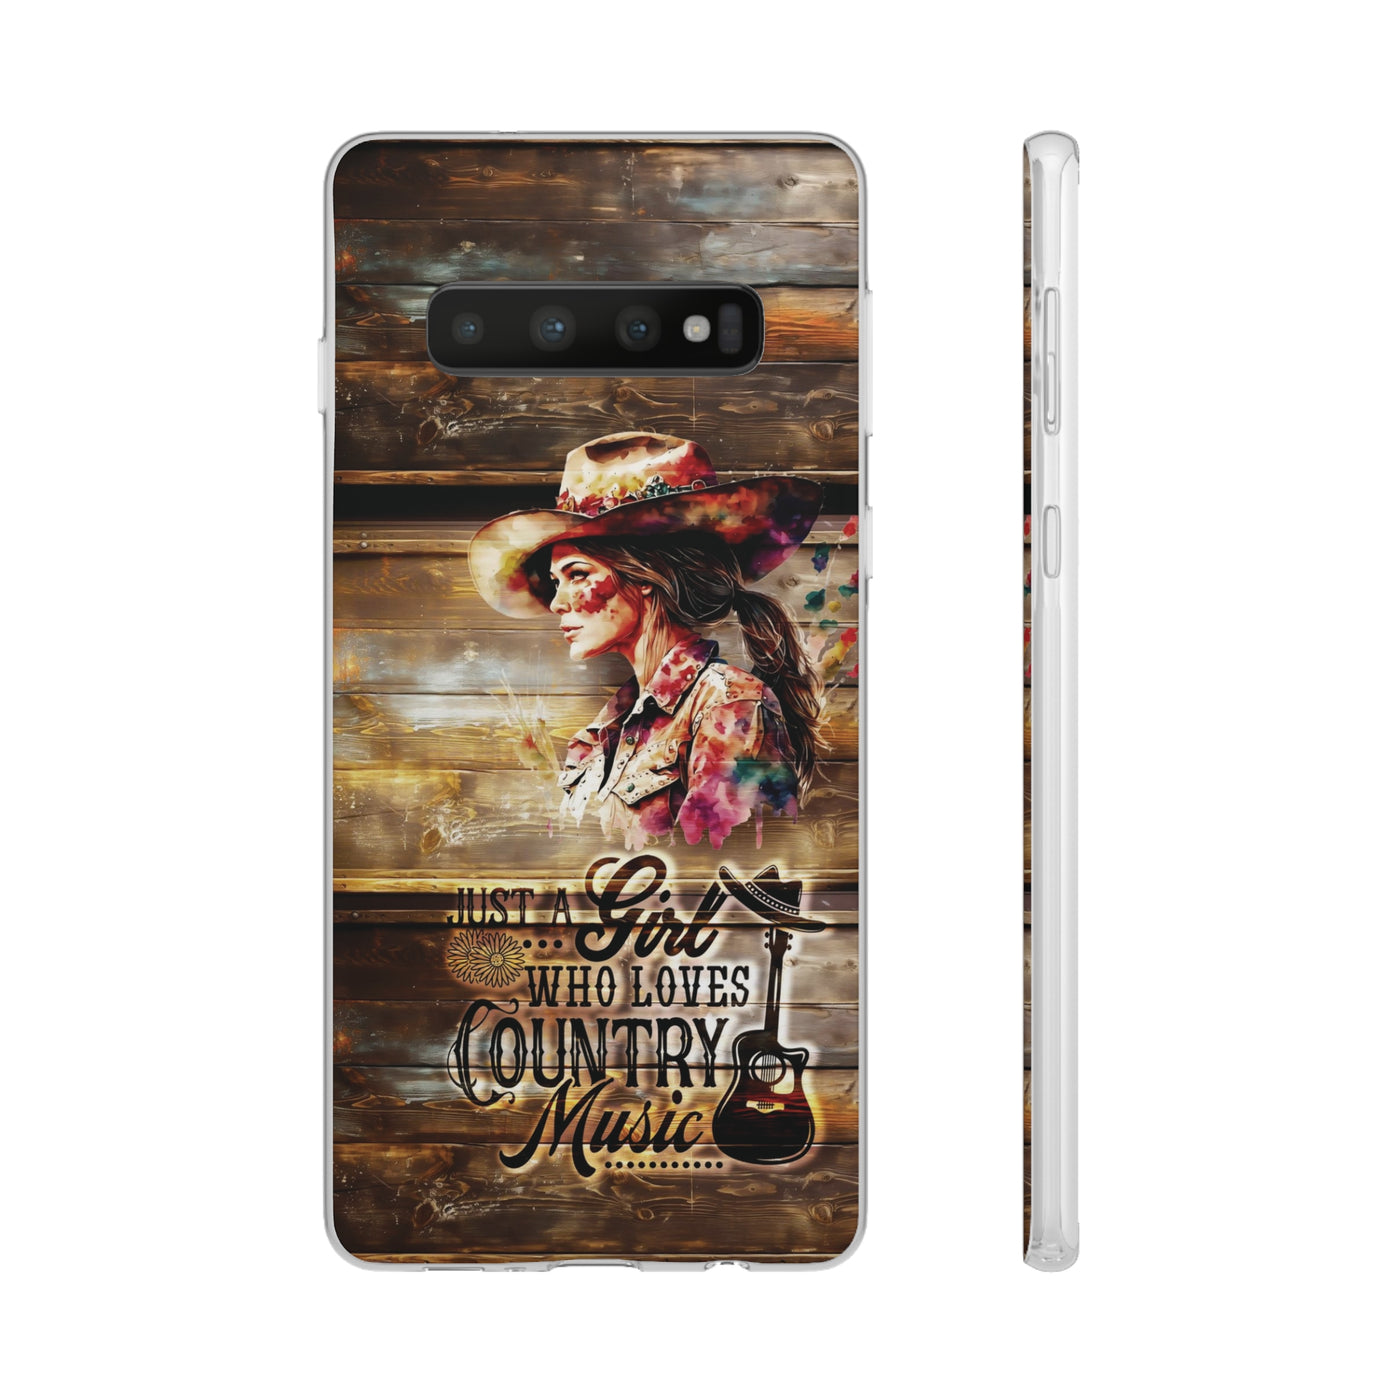 Cute Flexi Samsung Phone Cases, Country Music Inspiration Galaxy S23 Phone Case, Samsung S22 Case, Samsung S21 Case, S20 Plus